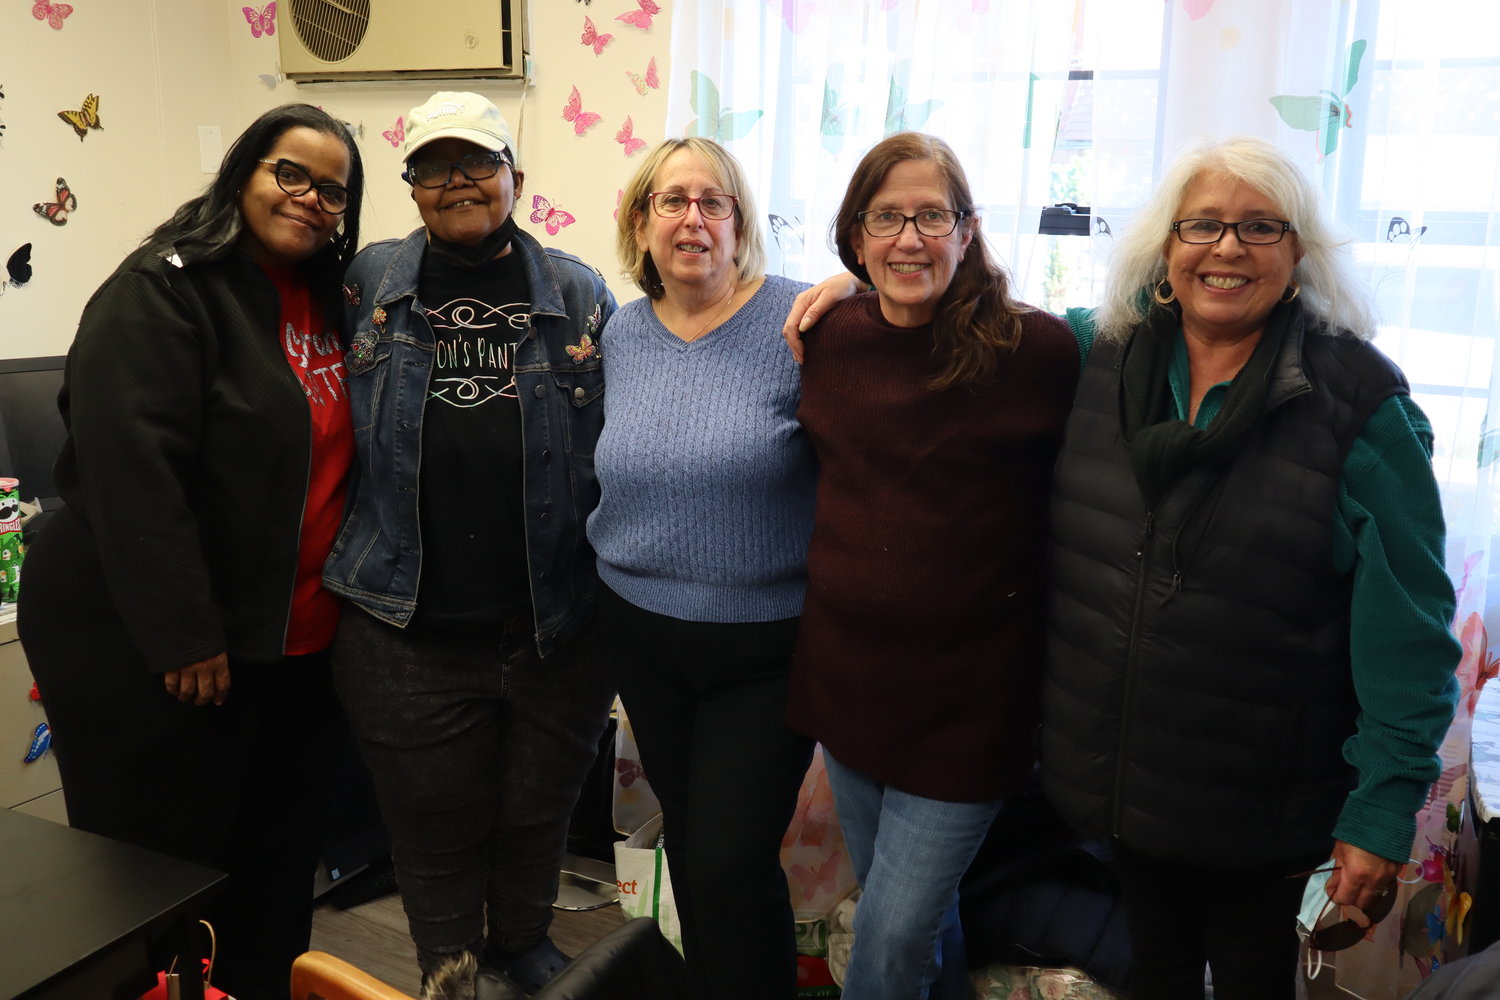 The Sharon’s Pantry team, from left, Karen Mobley, Sharon Shepherd, Rena Ribeck, Carol Fisher and Judy Rattner, volunteer at the pantry every Friday.